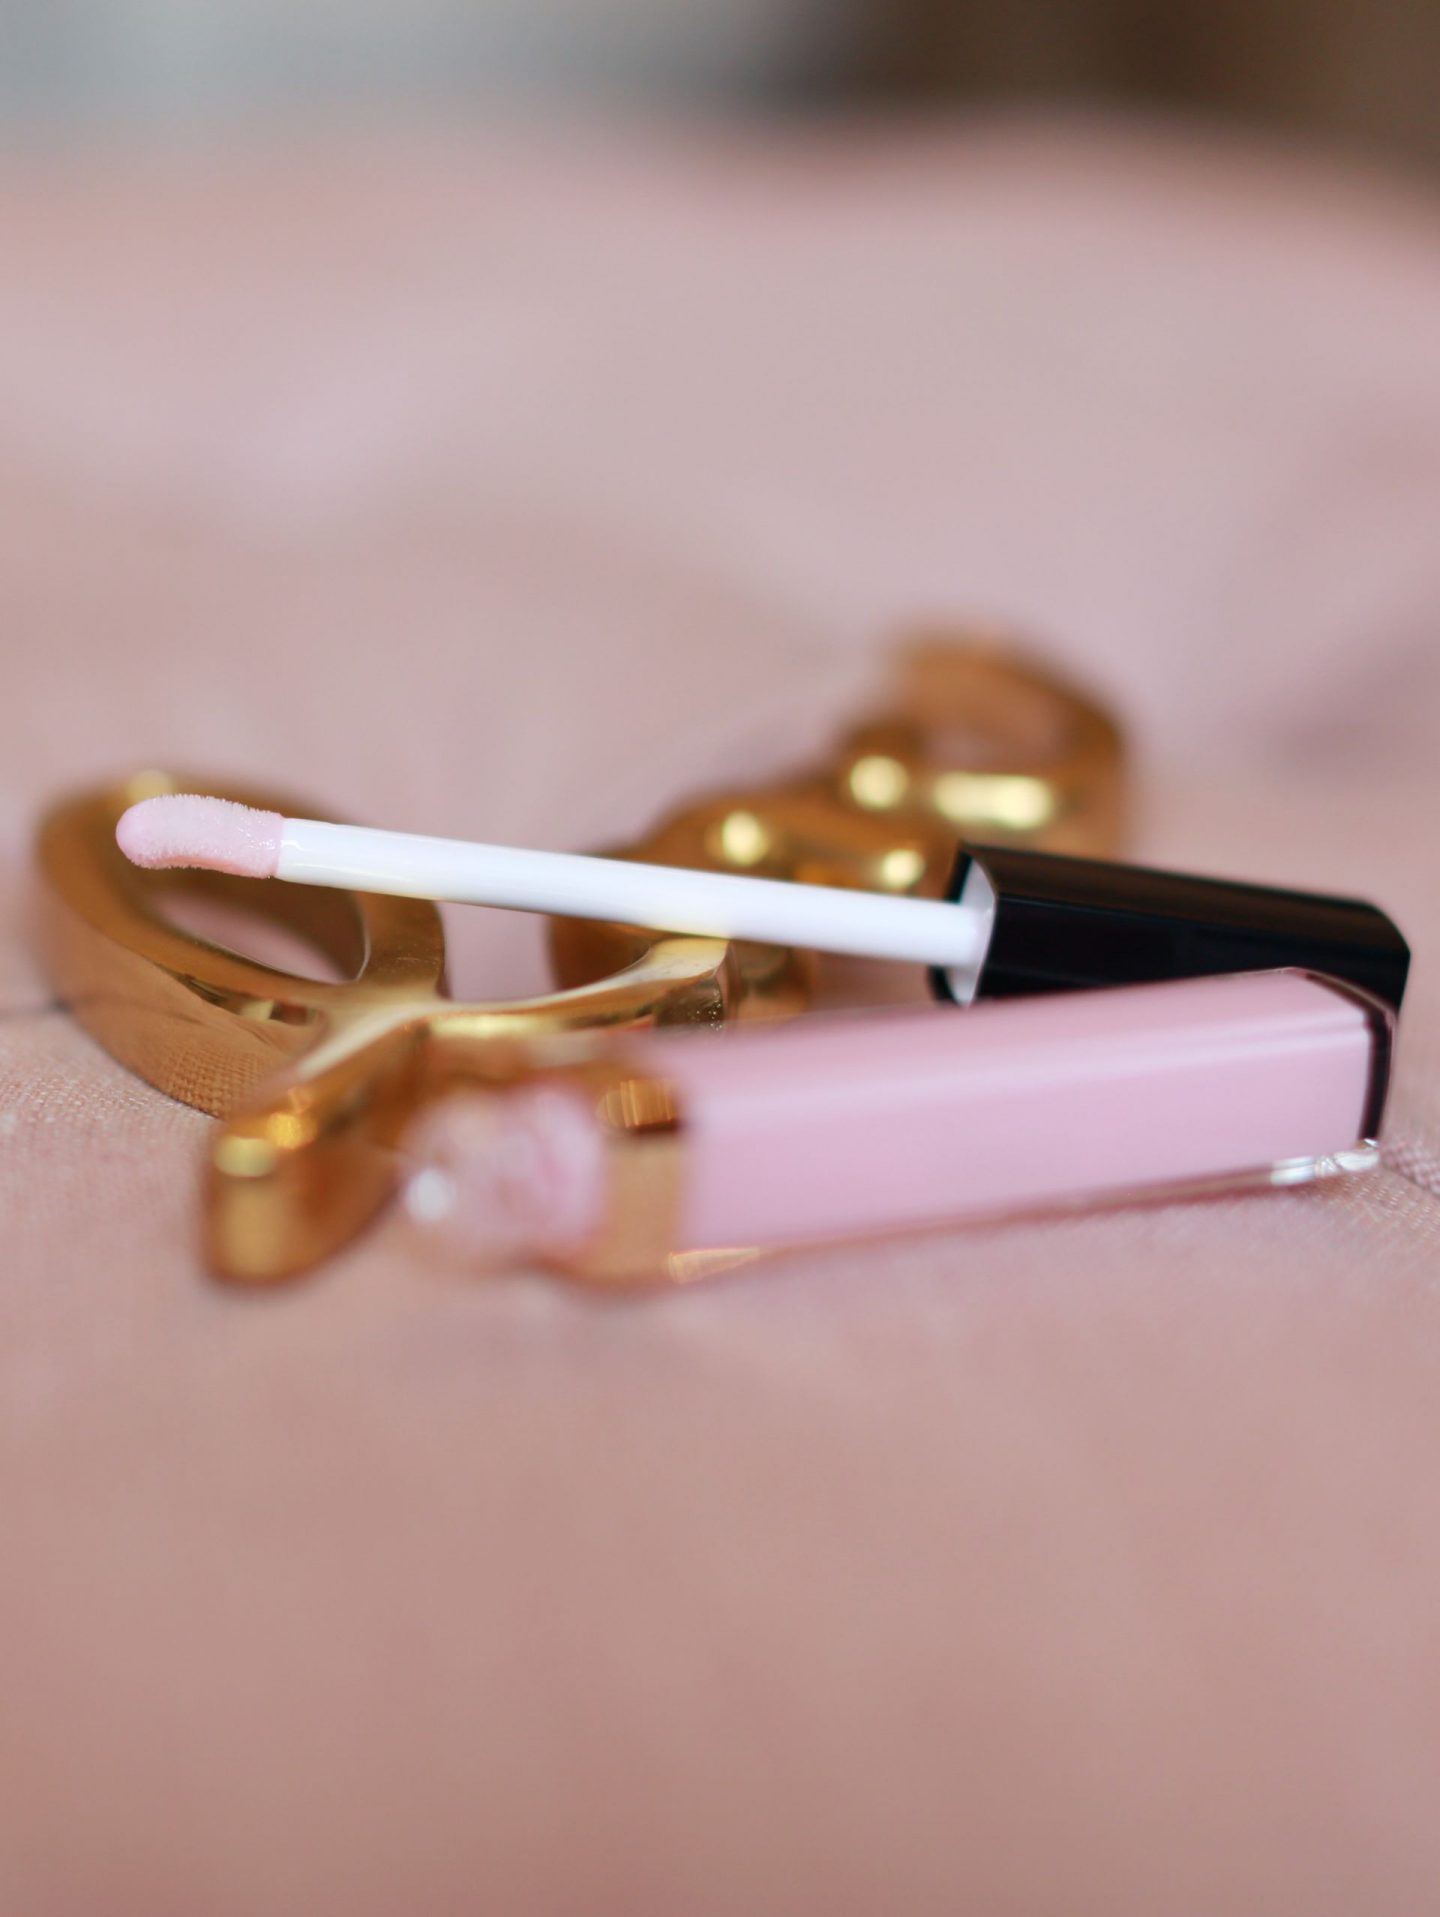 CHANEL Glossimers DISCONTINUED?!?! Introducing the NEW Rouge Coco Lip Gloss  Full Review 